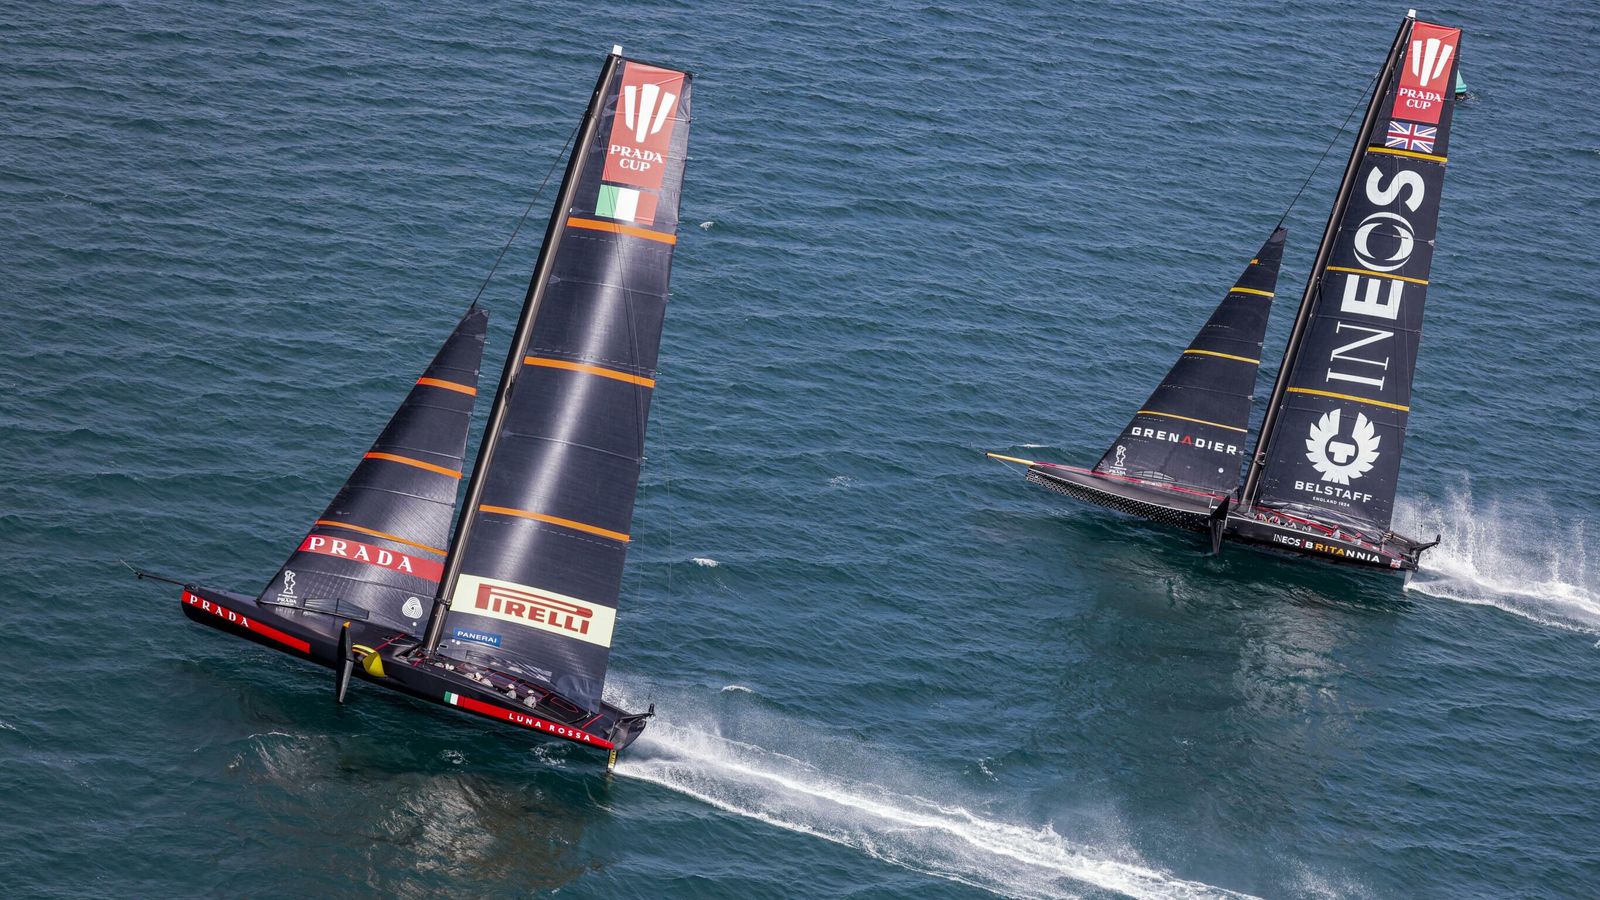 36th America's Cup Uncertainty surrounds future schedule due to New